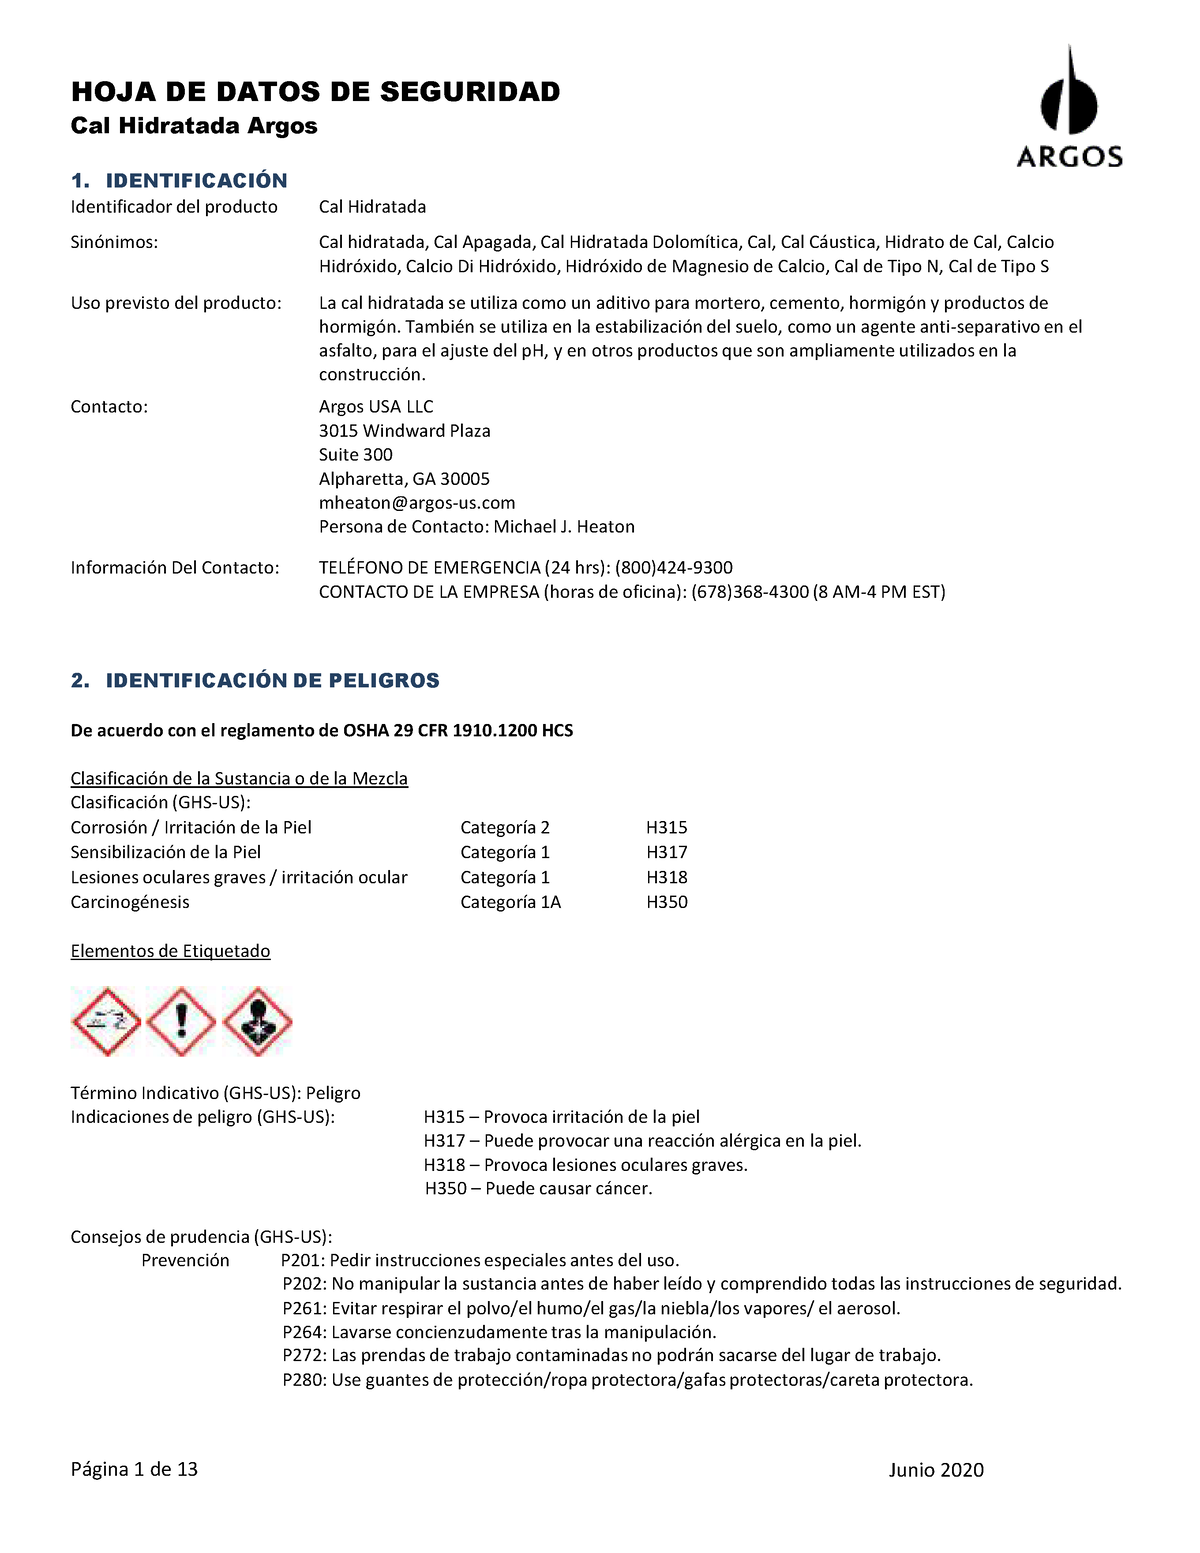 5 Argos Hydrated Lime Safety Data Sheet Espanol 6 16 2020CAL - Cal